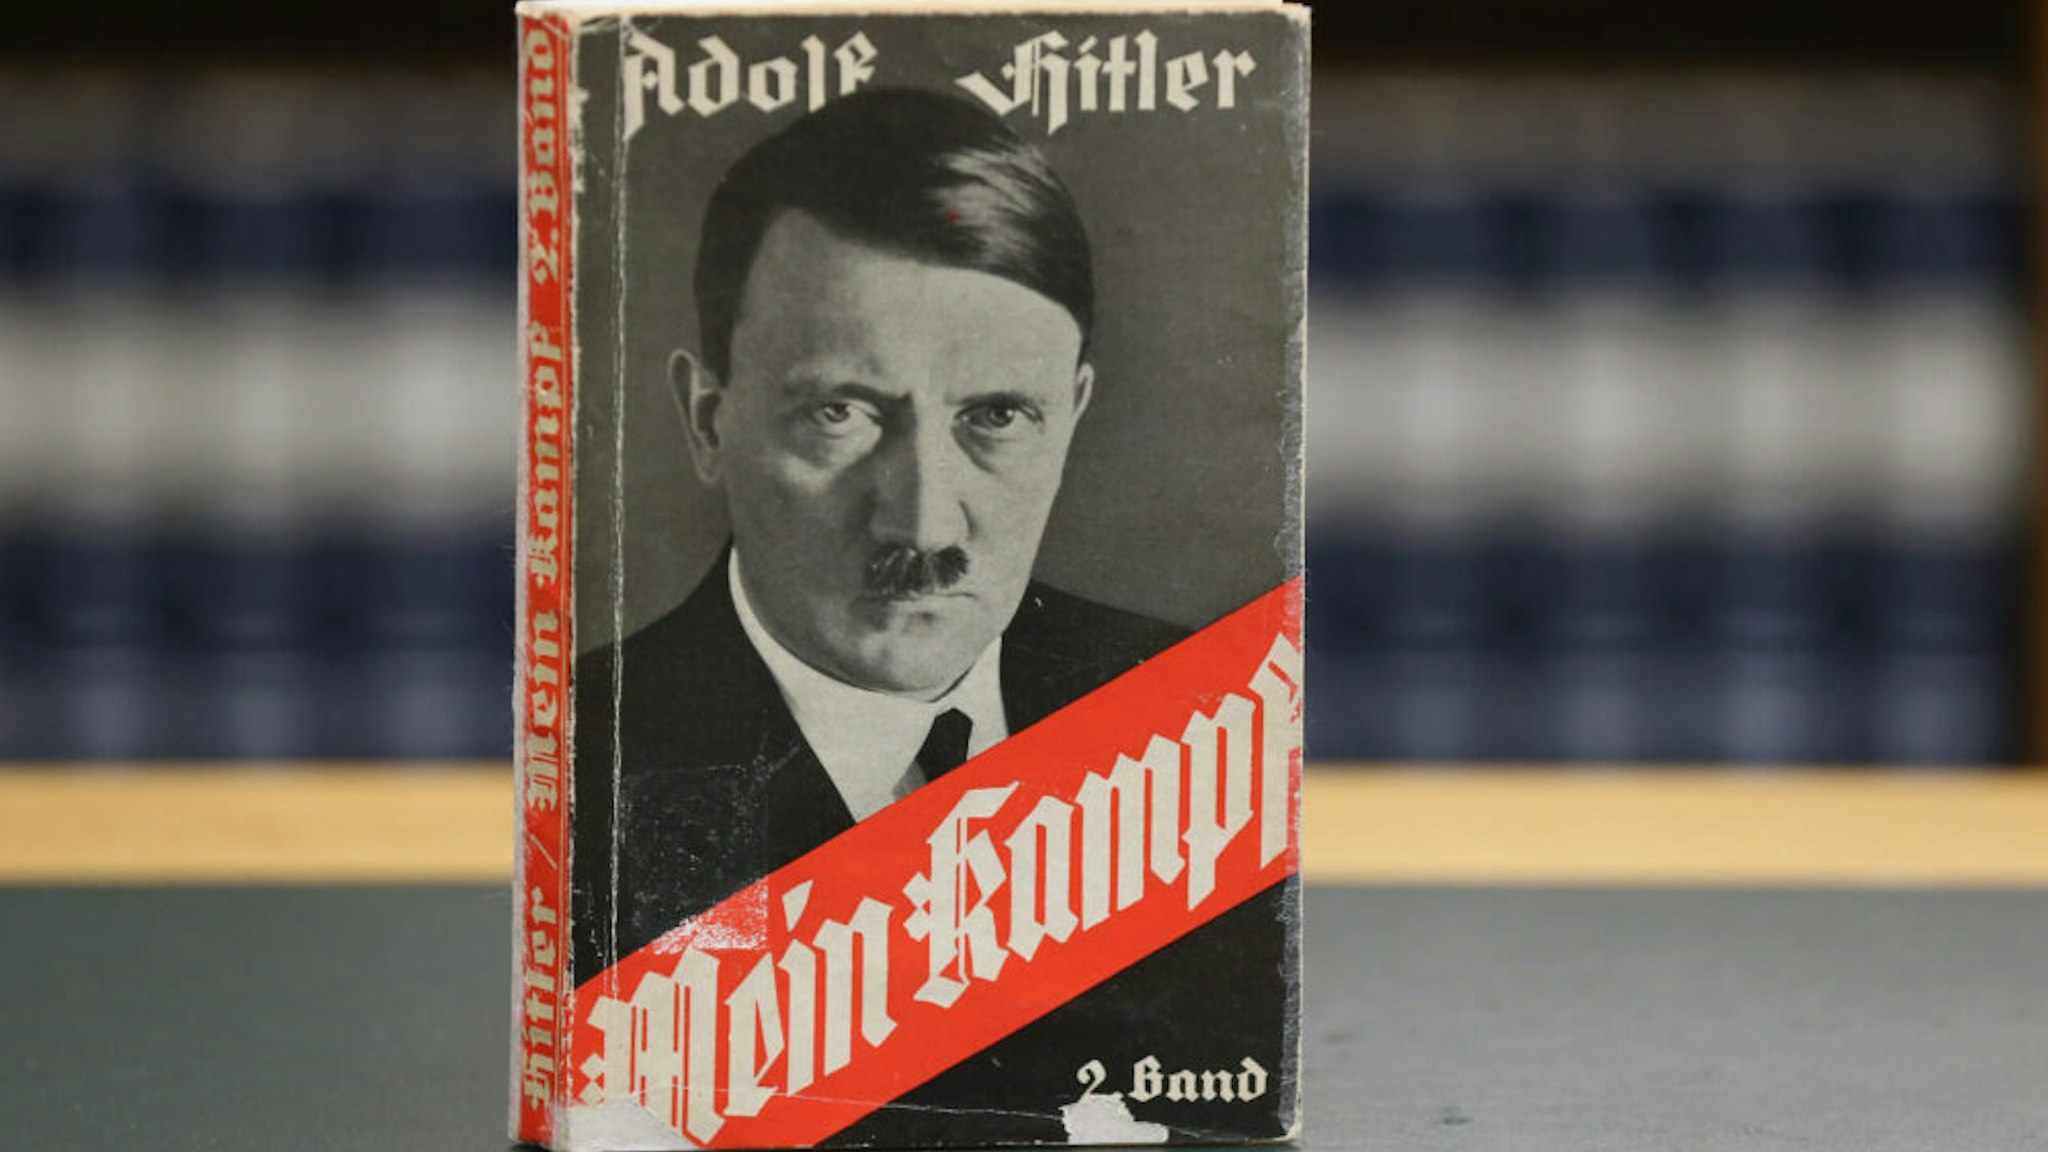 BERLIN, GERMANY - DECEMBER 15: A 1941 edition of Adolf Hitler's "Mein Kampf" ("My Struggle") stands at the library of the Deutsches Historisches Museum (German Historical Museum) on December 15, 2015 in Berlin, Germany. The state of Bavaria took possession of the copyright to the book after World War II, though the copyright is due to expire and the book will enter the public domain on January 1, 2016. Germany will continue to heavily restrict publication of the book in Germany though it will have little control over publications abroad. Hitler wrote the book that is both an autobiography and also presents his political vision while he was a prisoner in Germany in he 1920s.